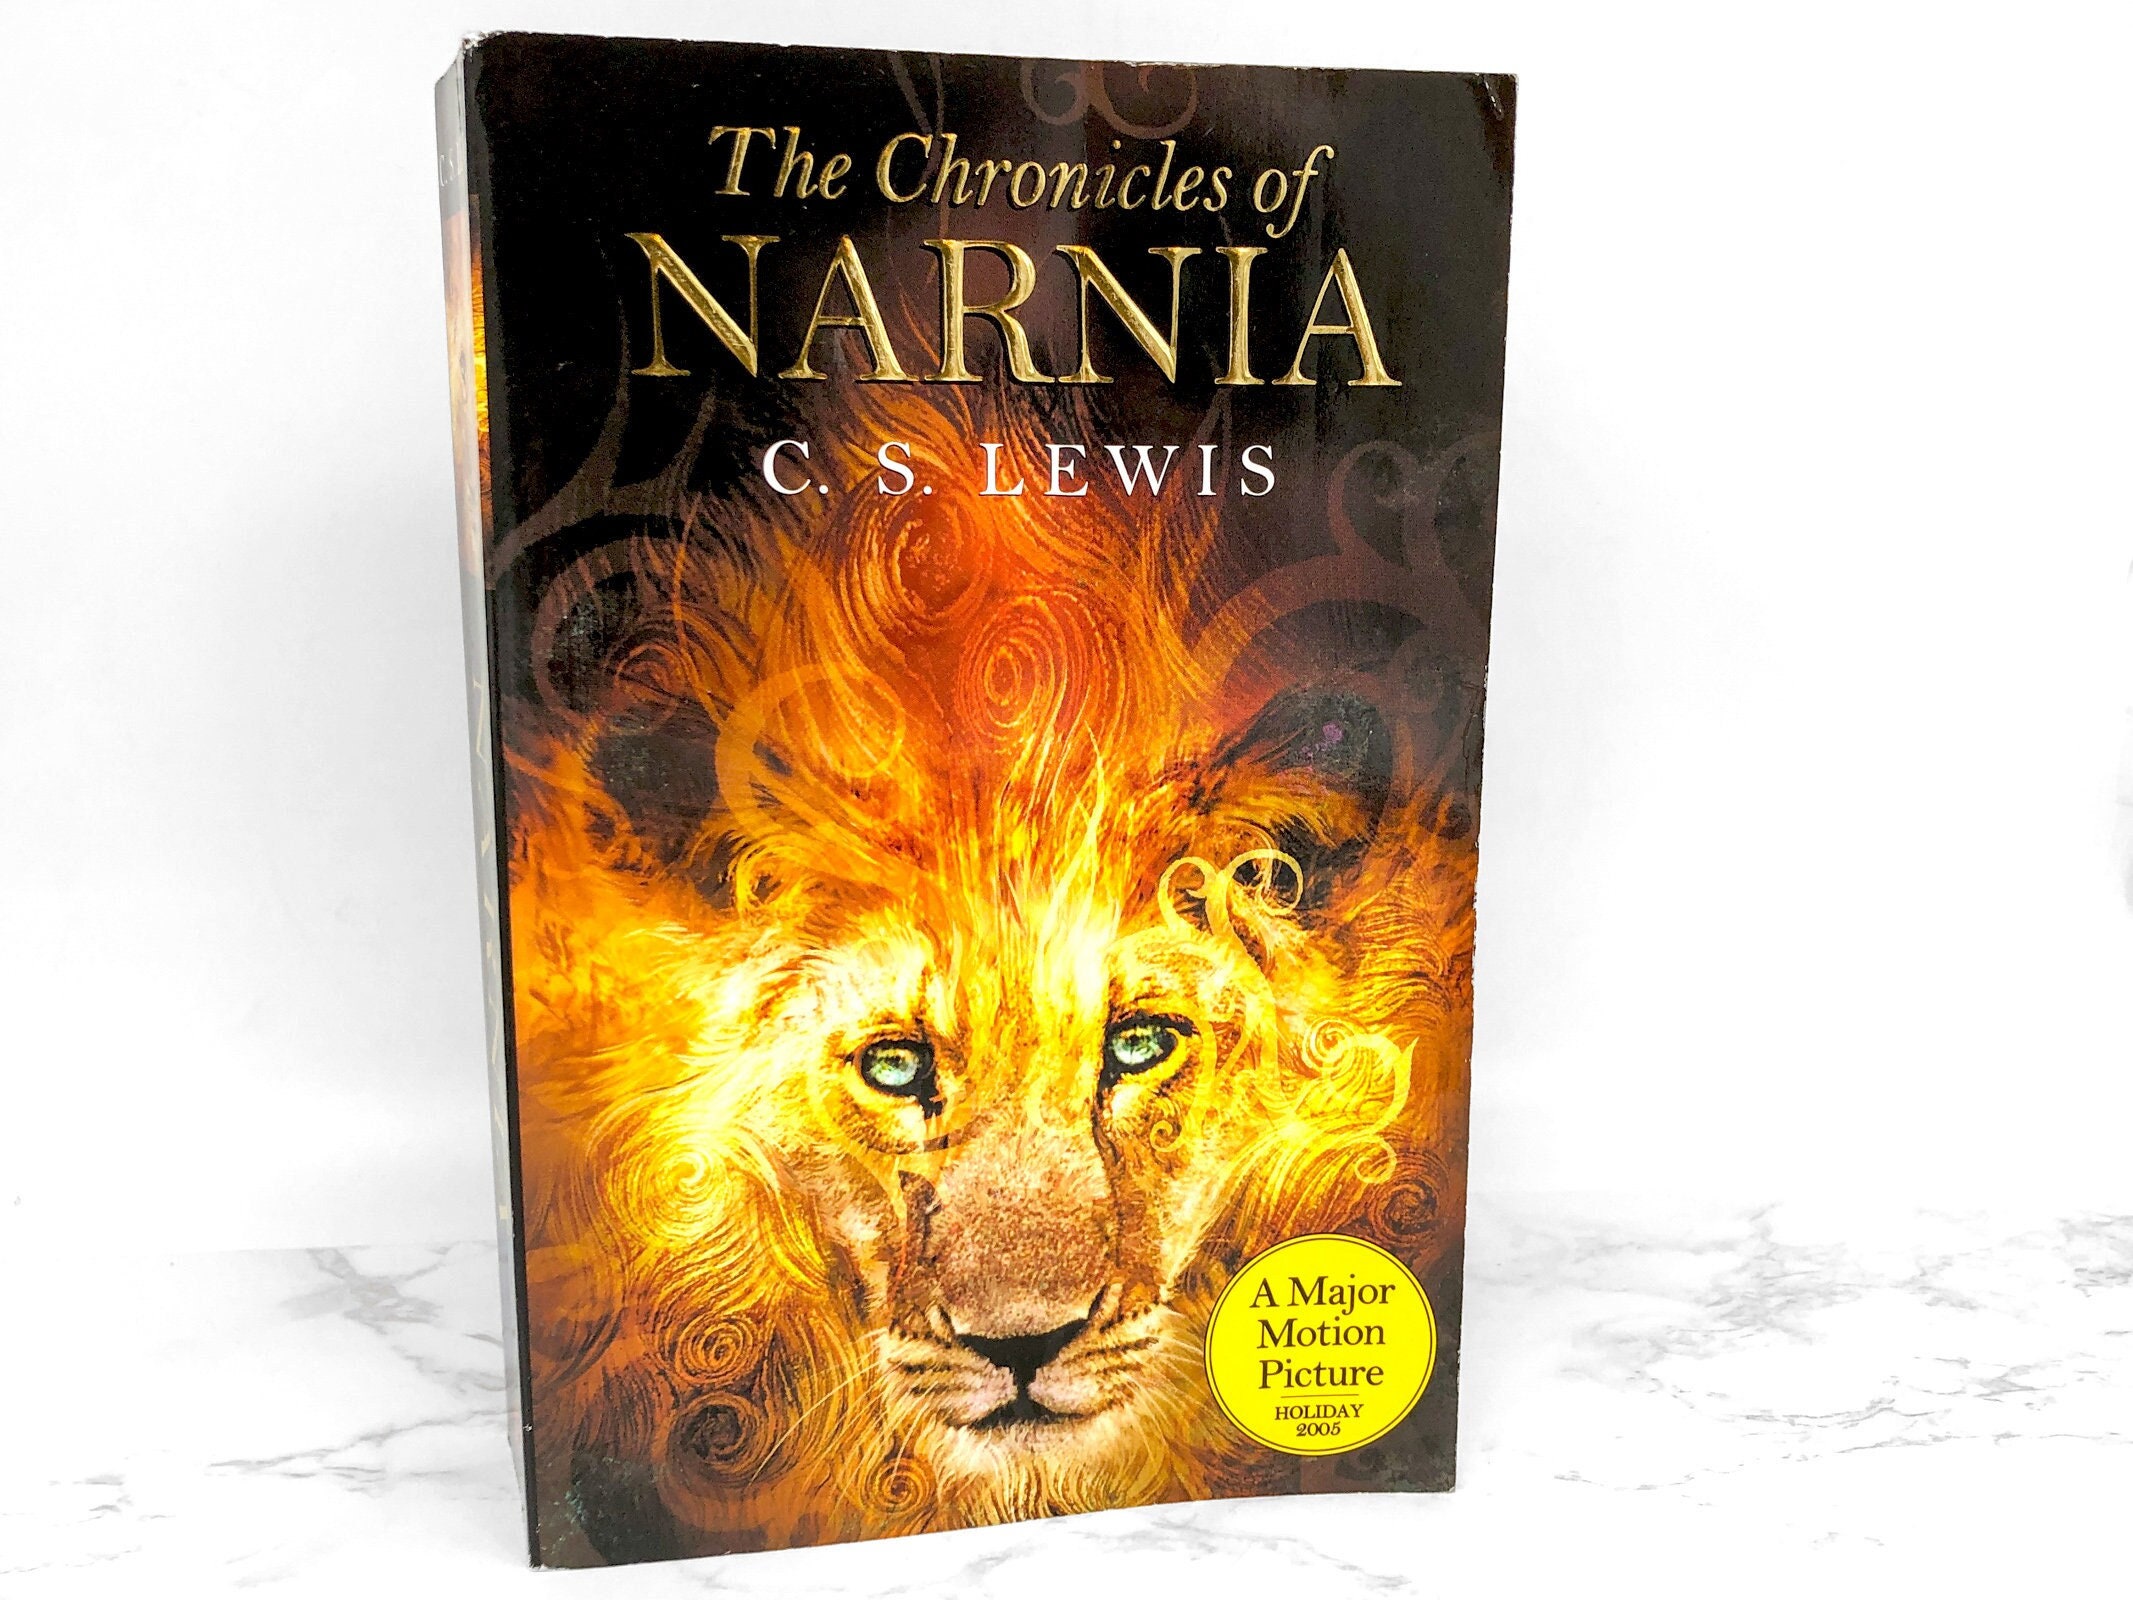  C.S. Lewis & Chronicles of Narnia - The True Story of